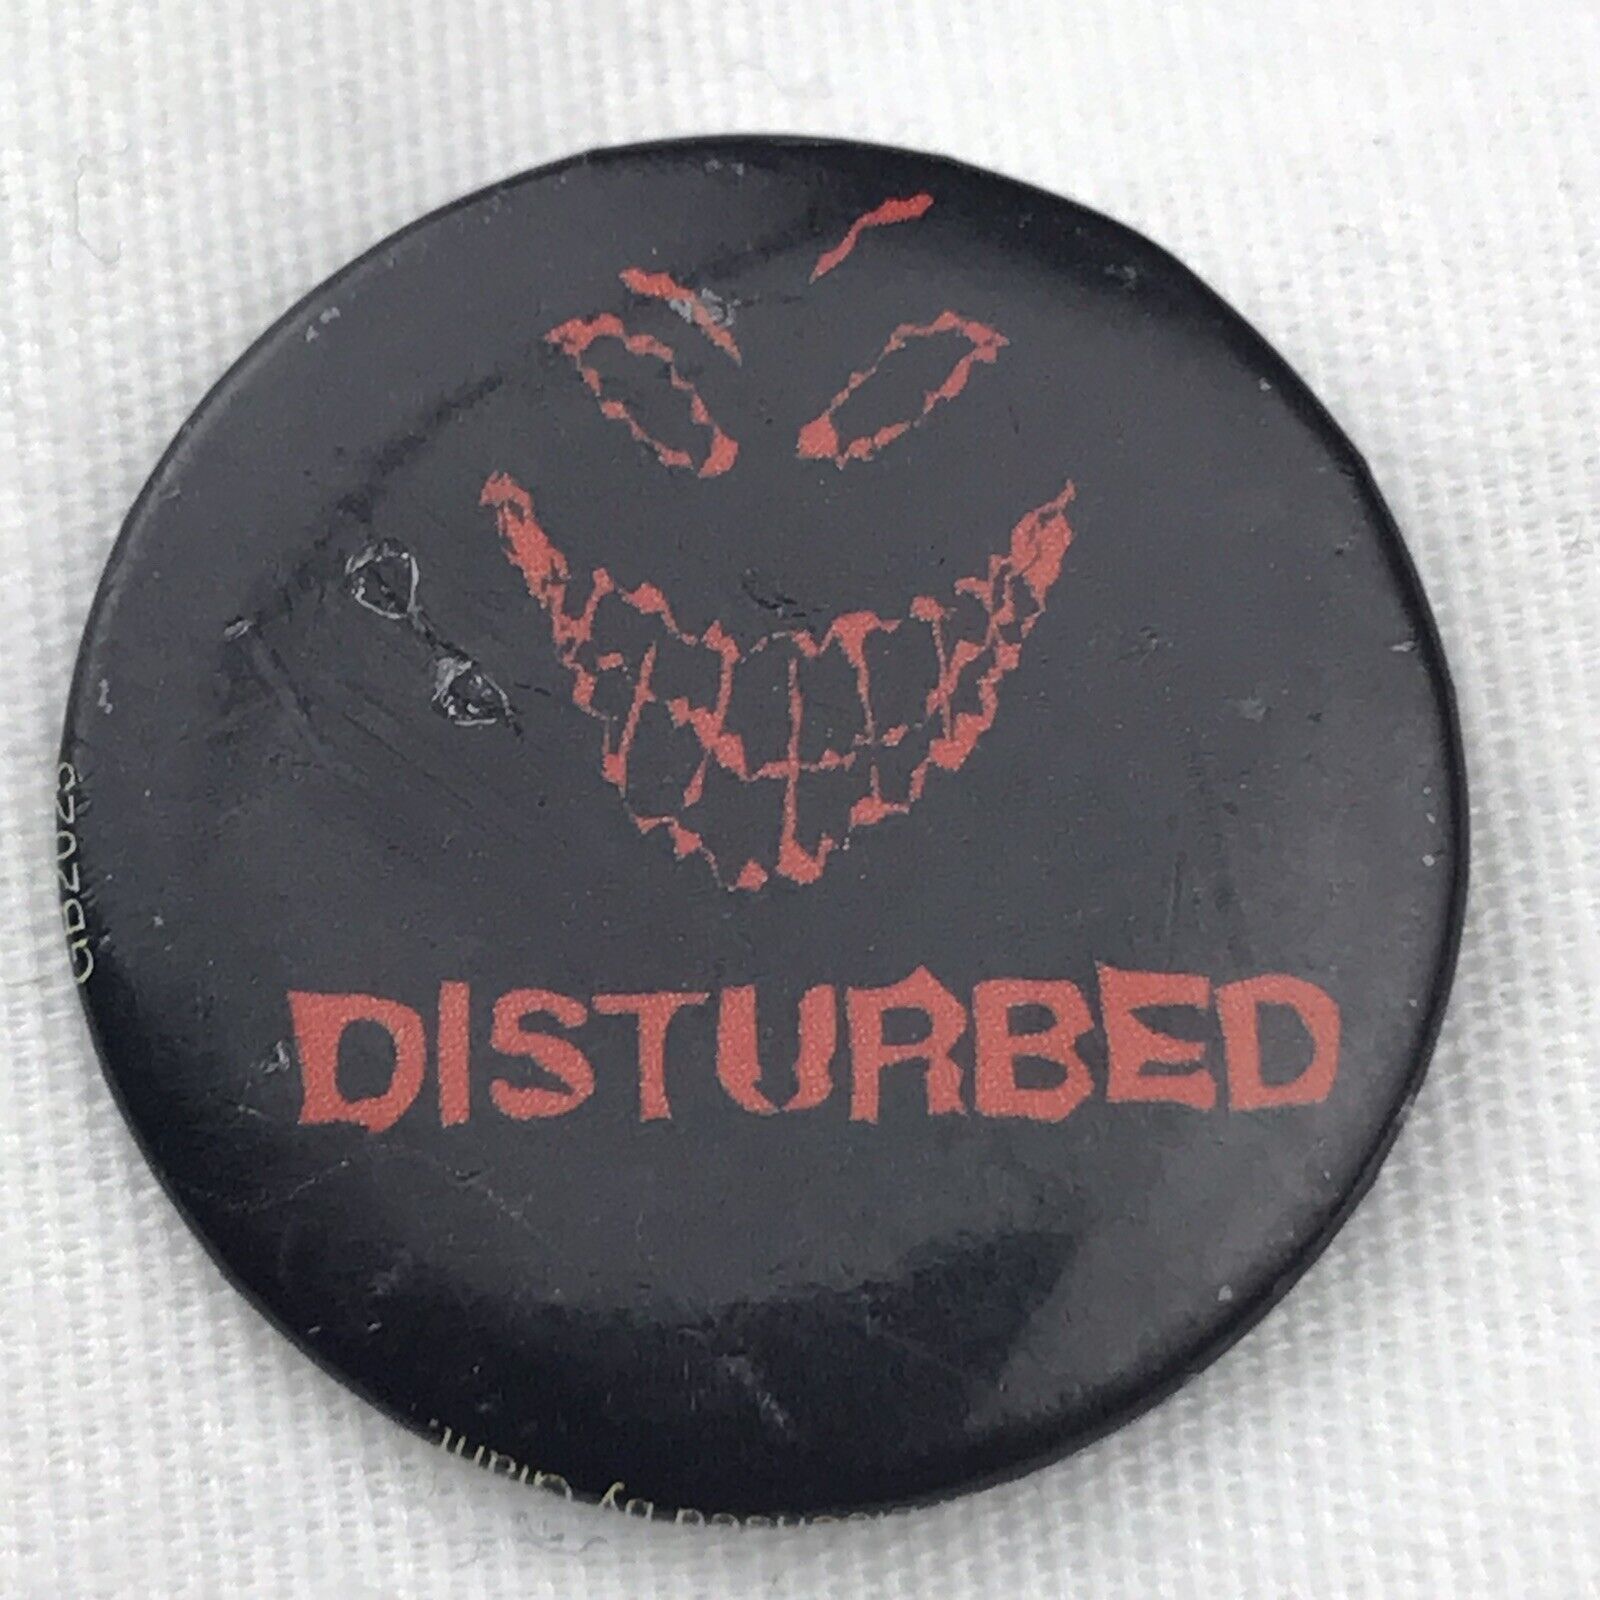 Disturbed Vintage Pin Button Small